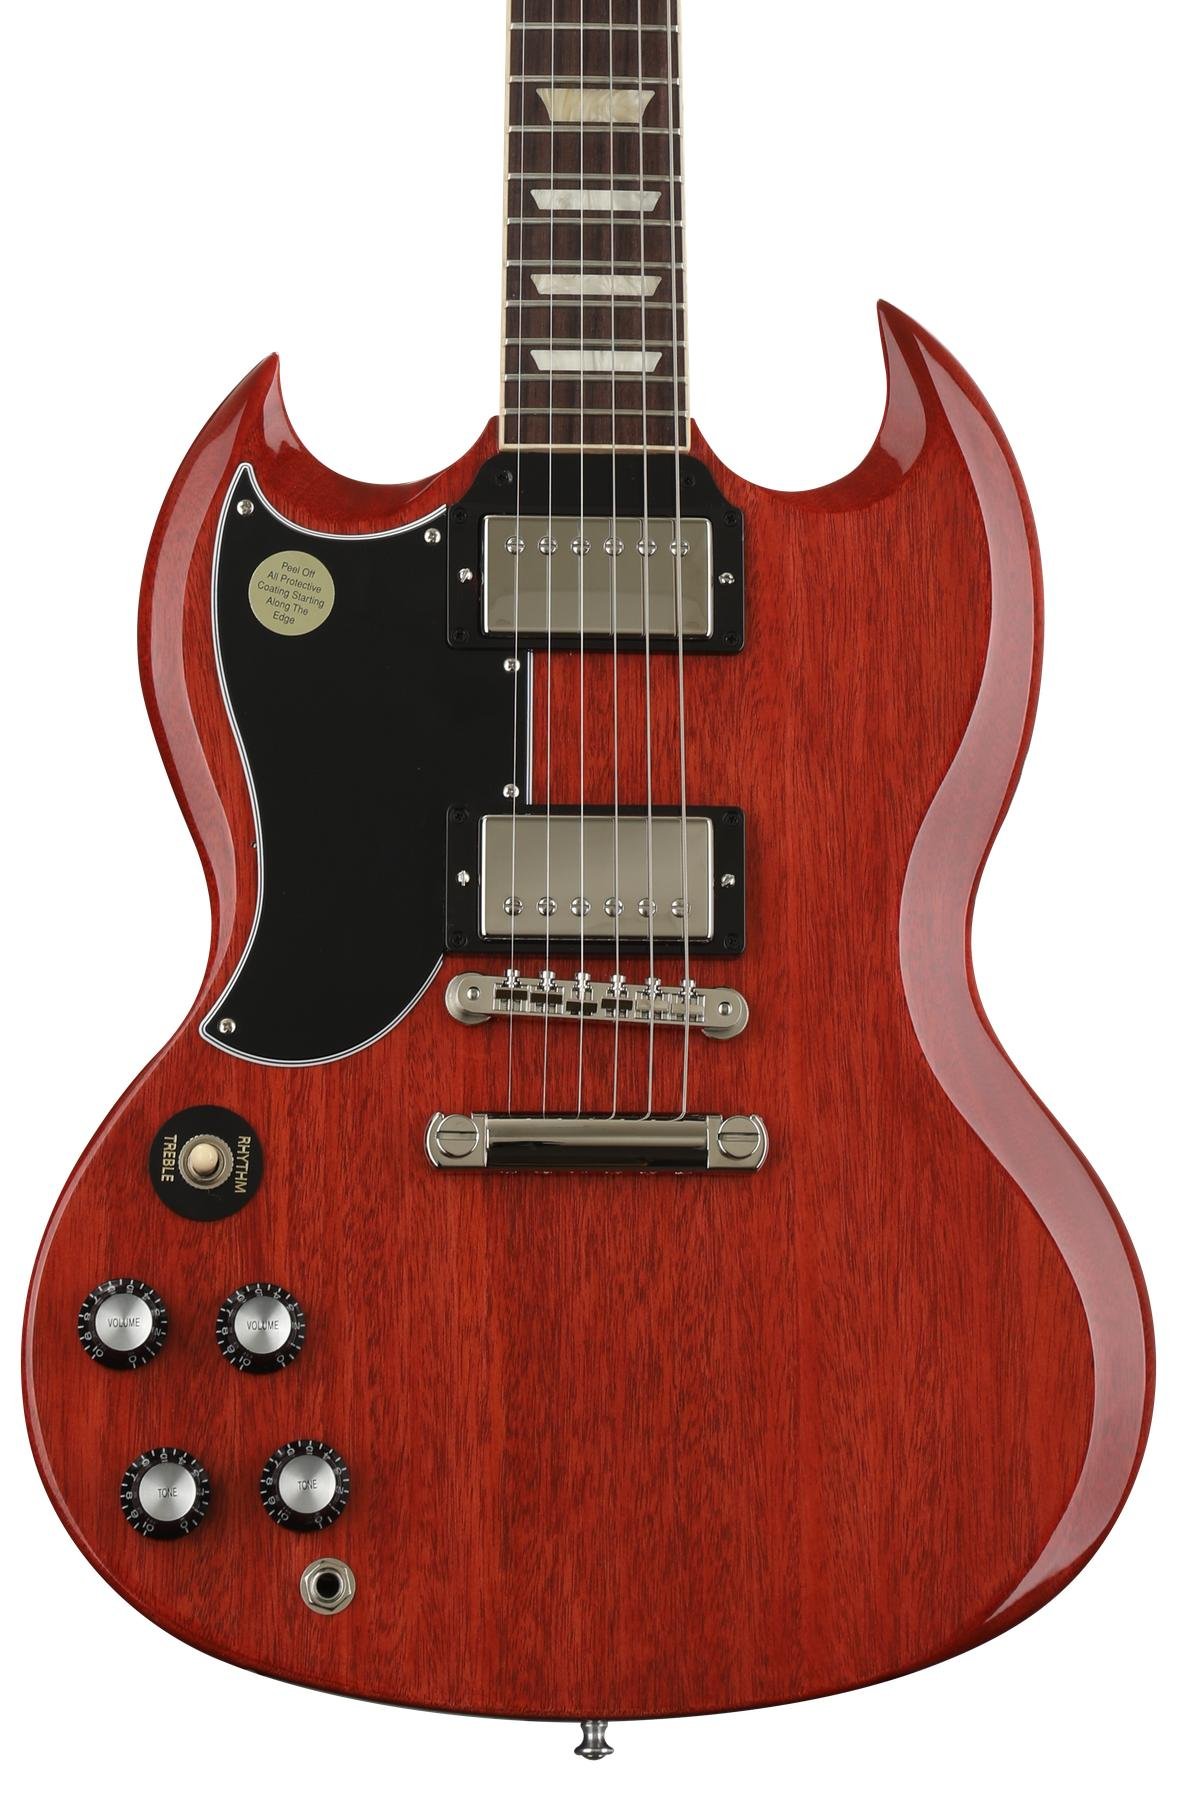 Gibson SG Standard '61 Left-handed - Cherry | Sweetwater